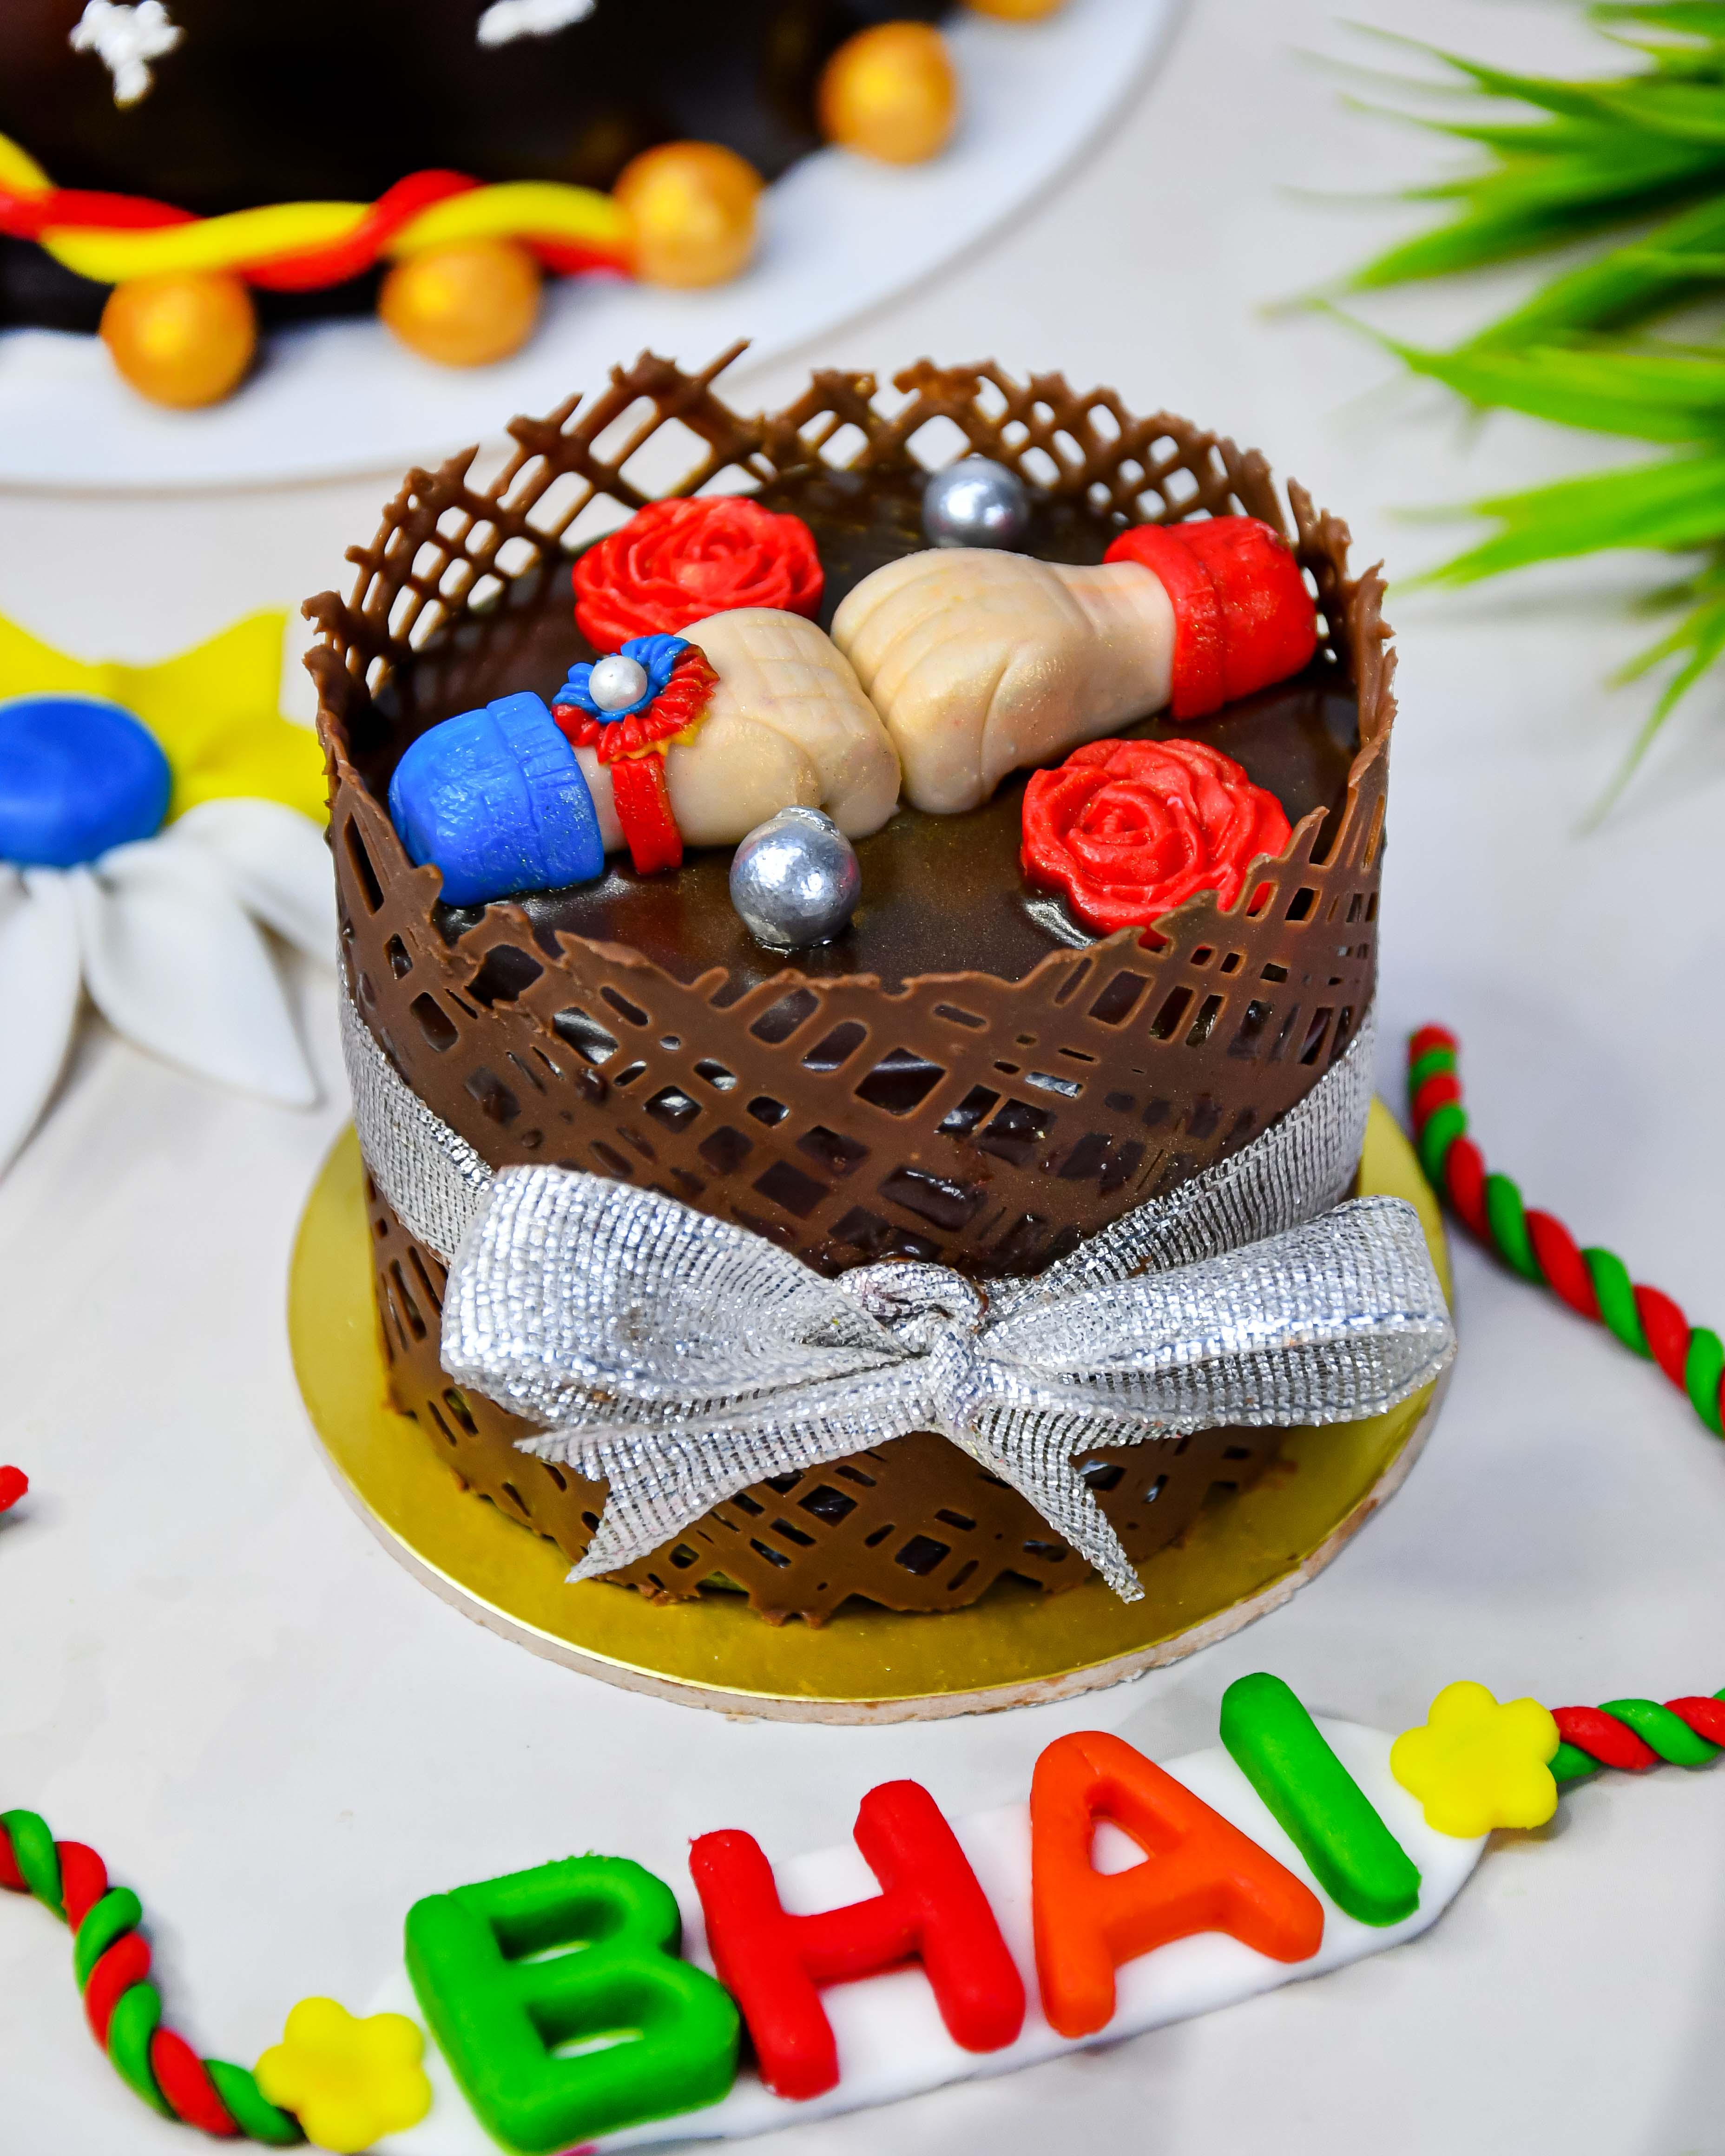 Top more than 151 pastry cake design